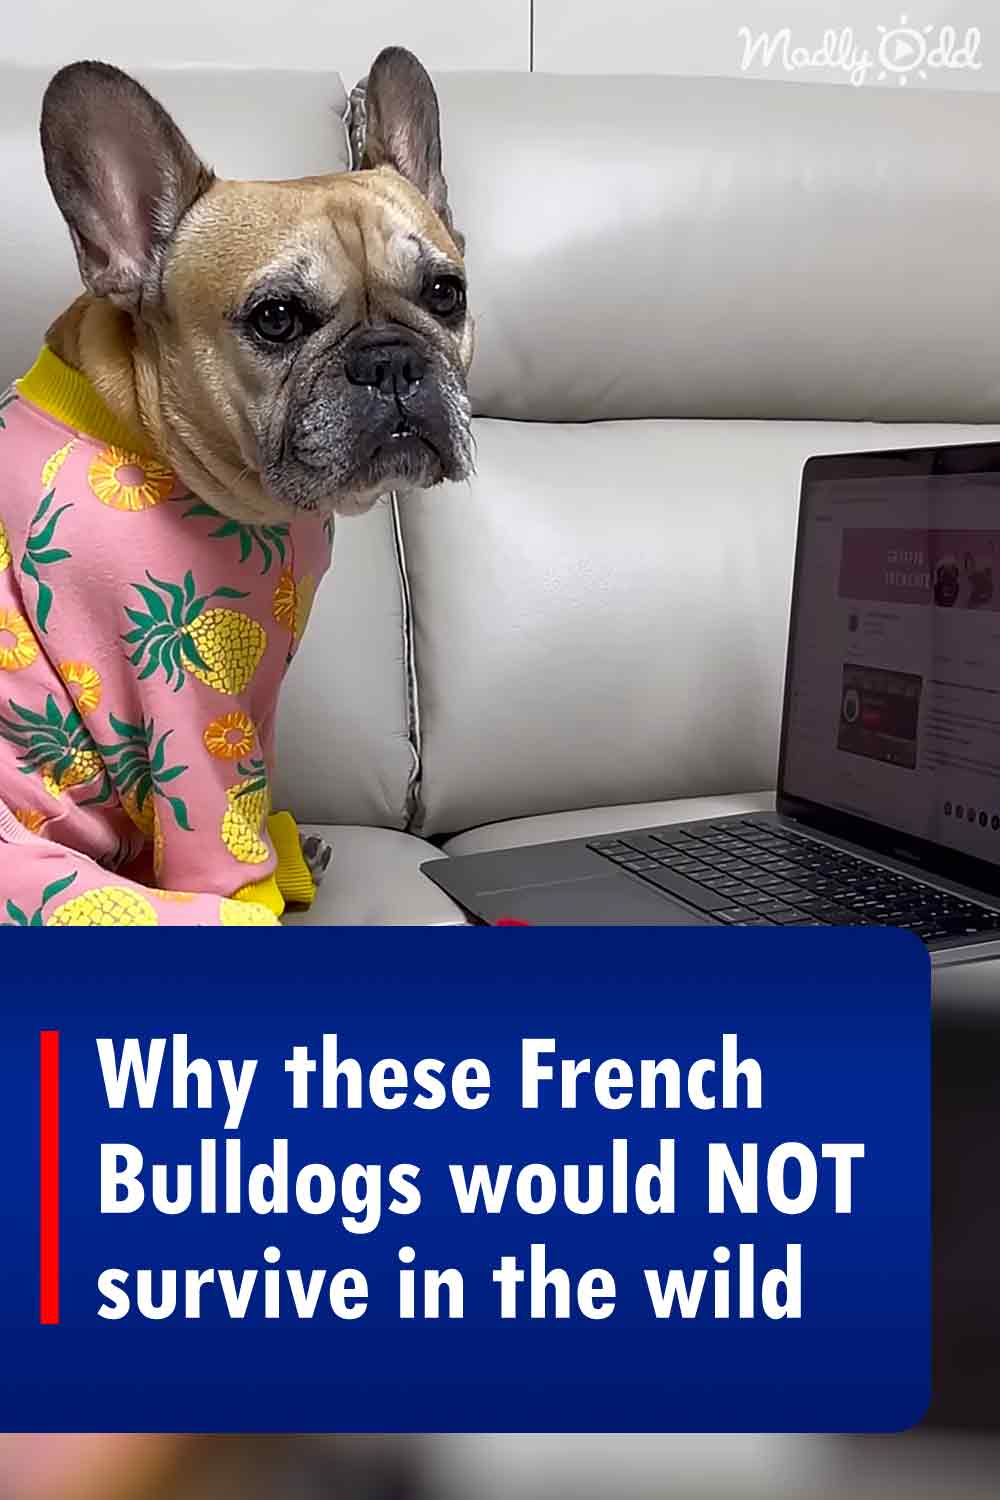 Why these French Bulldogs would NOT survive in the wild